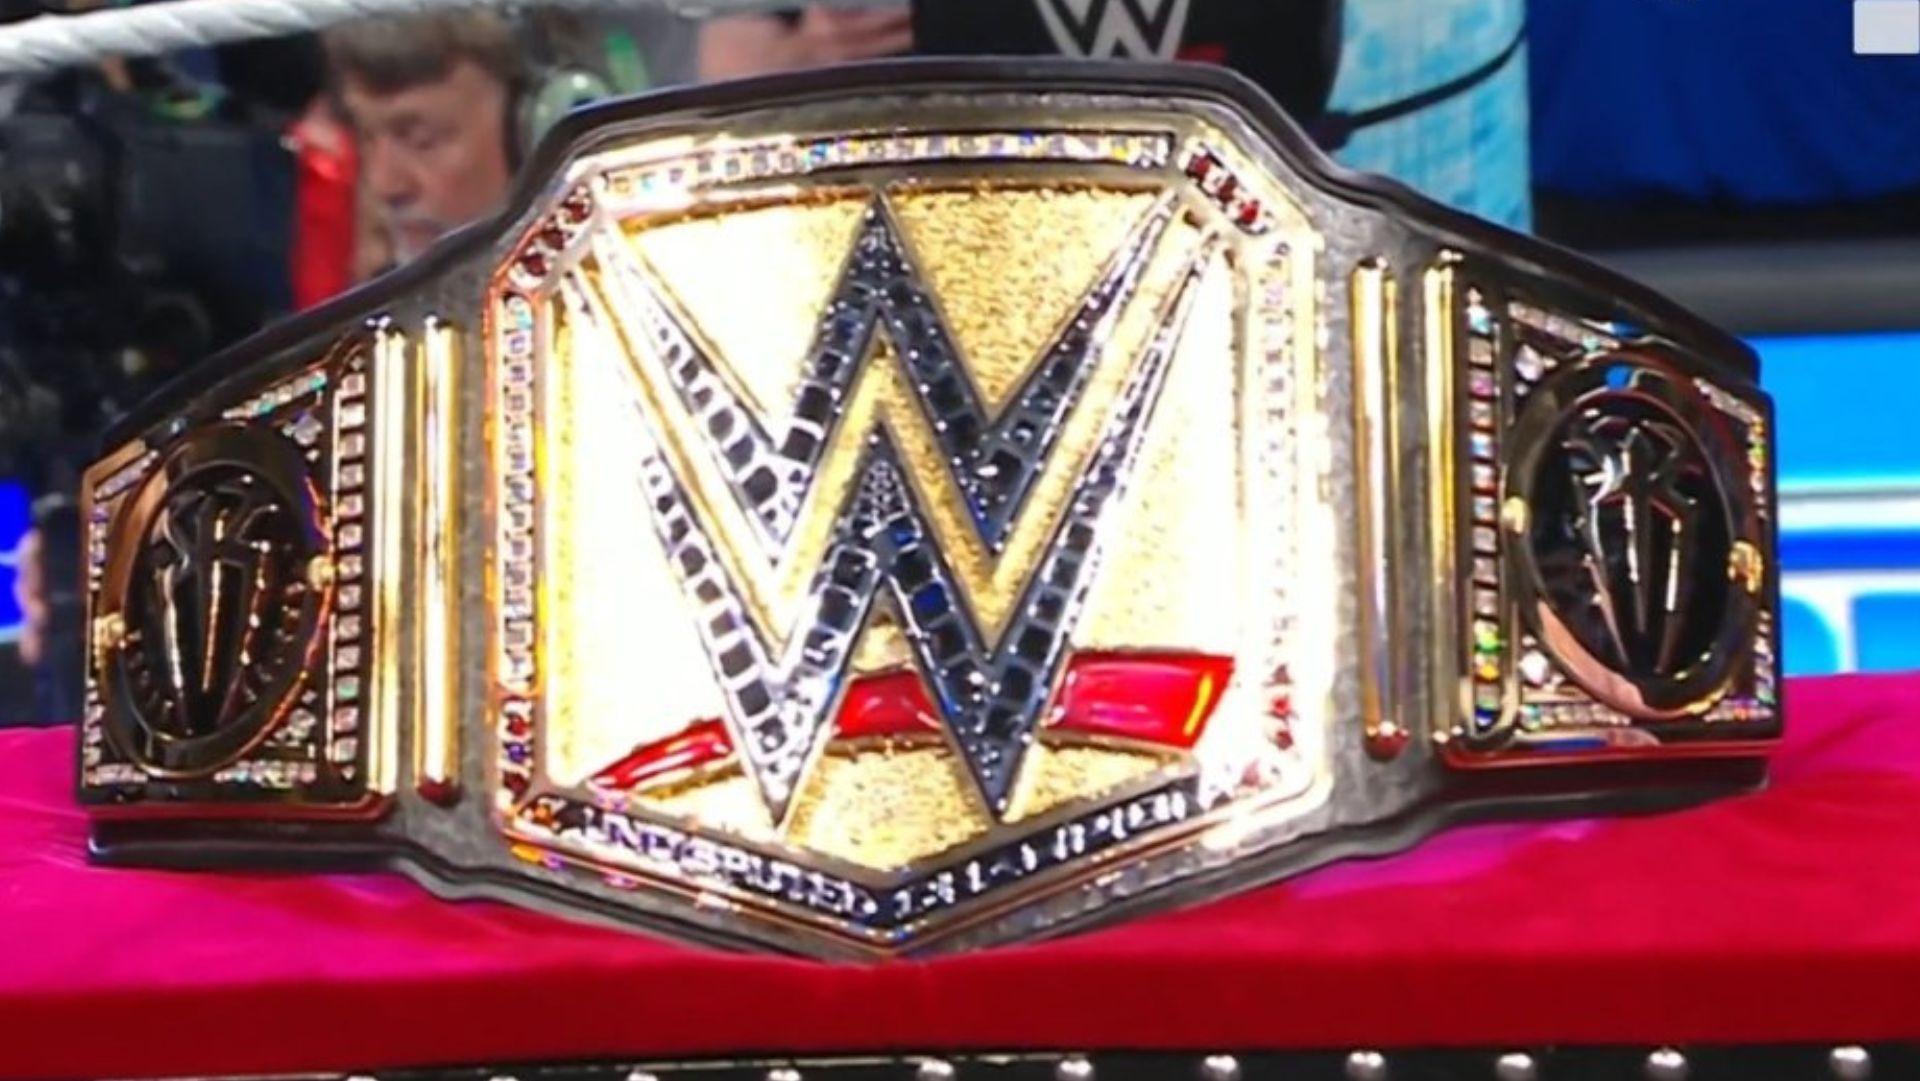 WWE Championship belt was introduced in 1963.